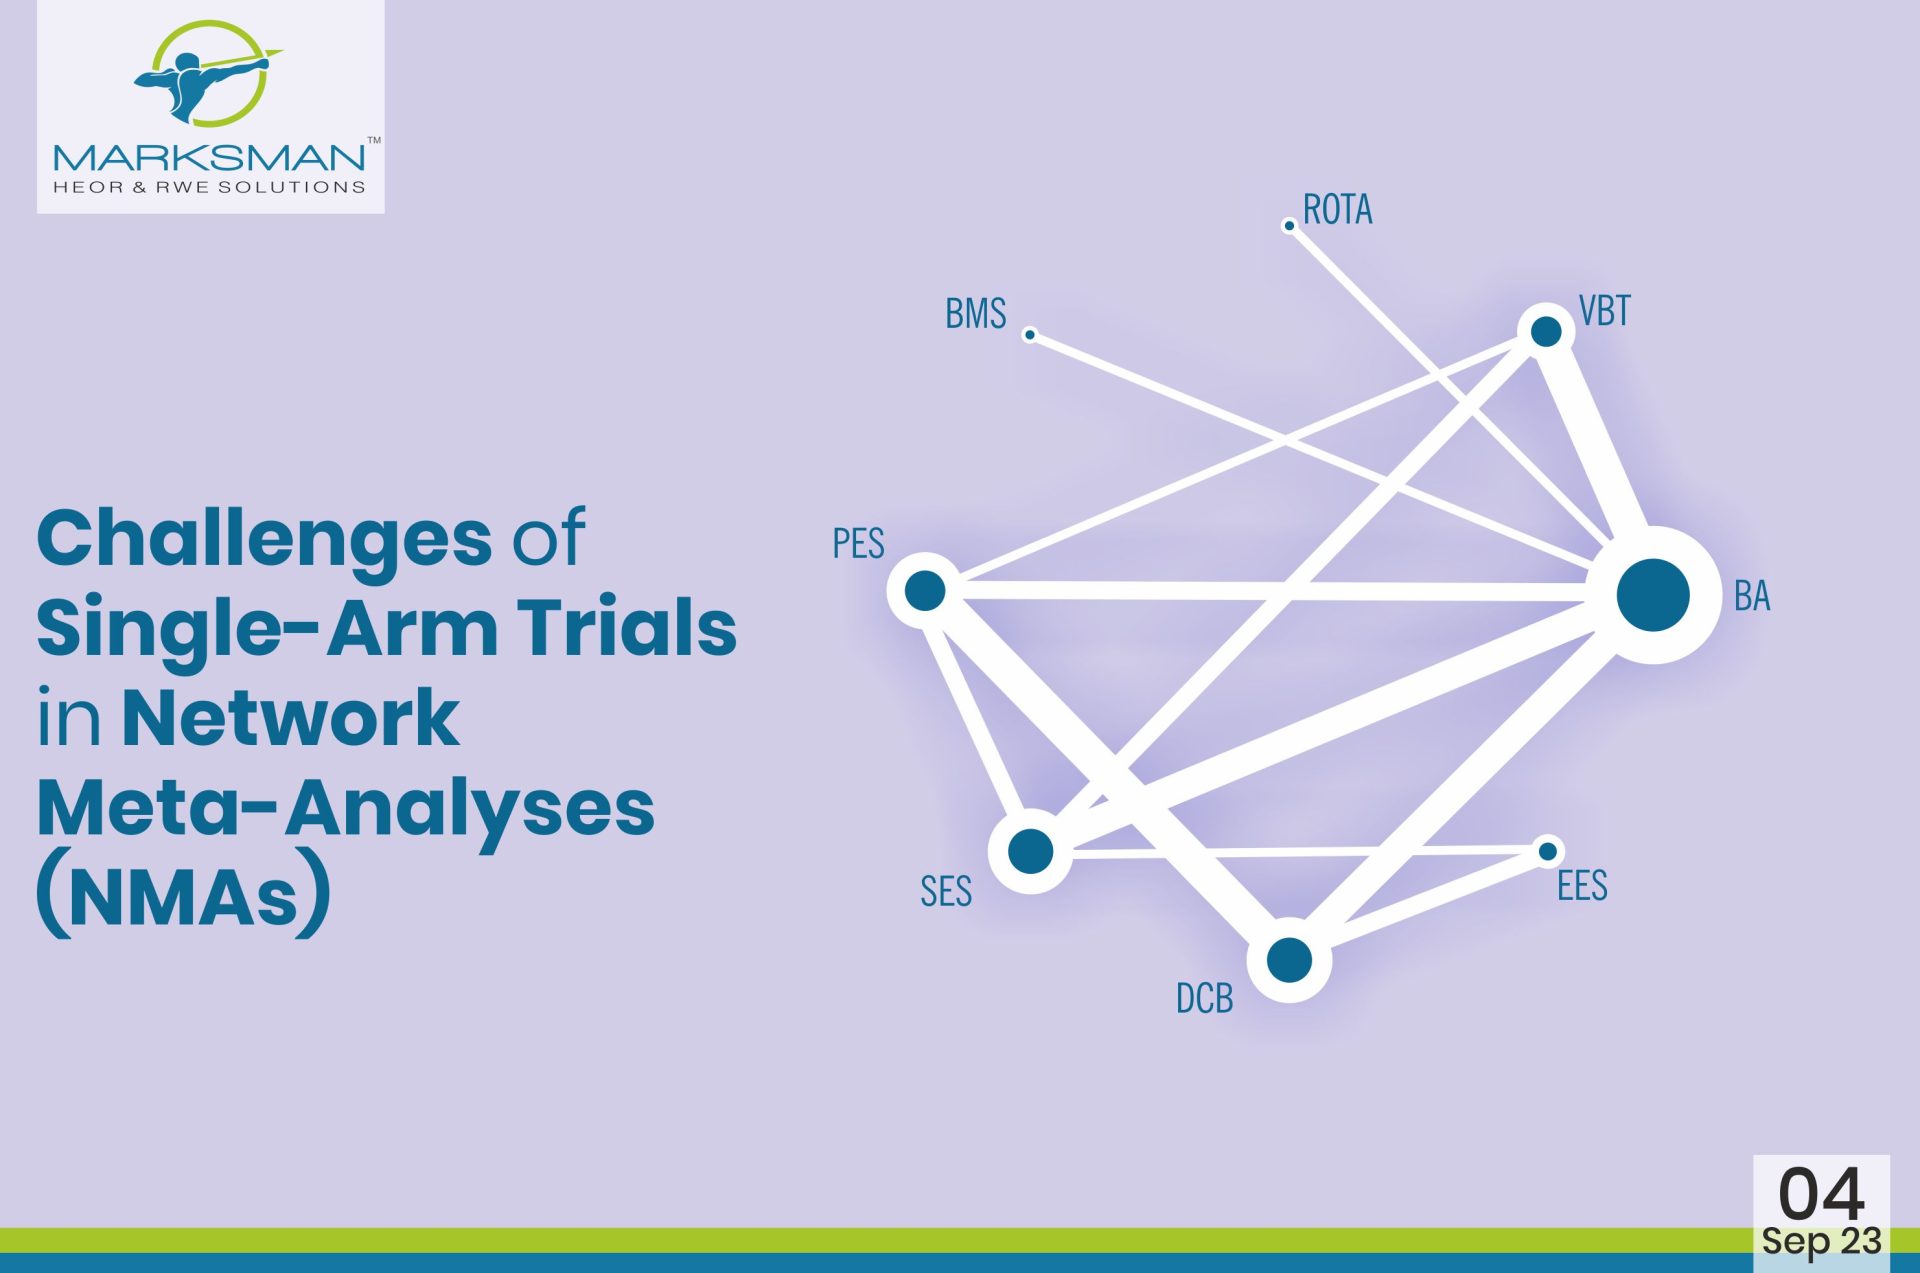 Challenges of Single-Arm Trials in NMA